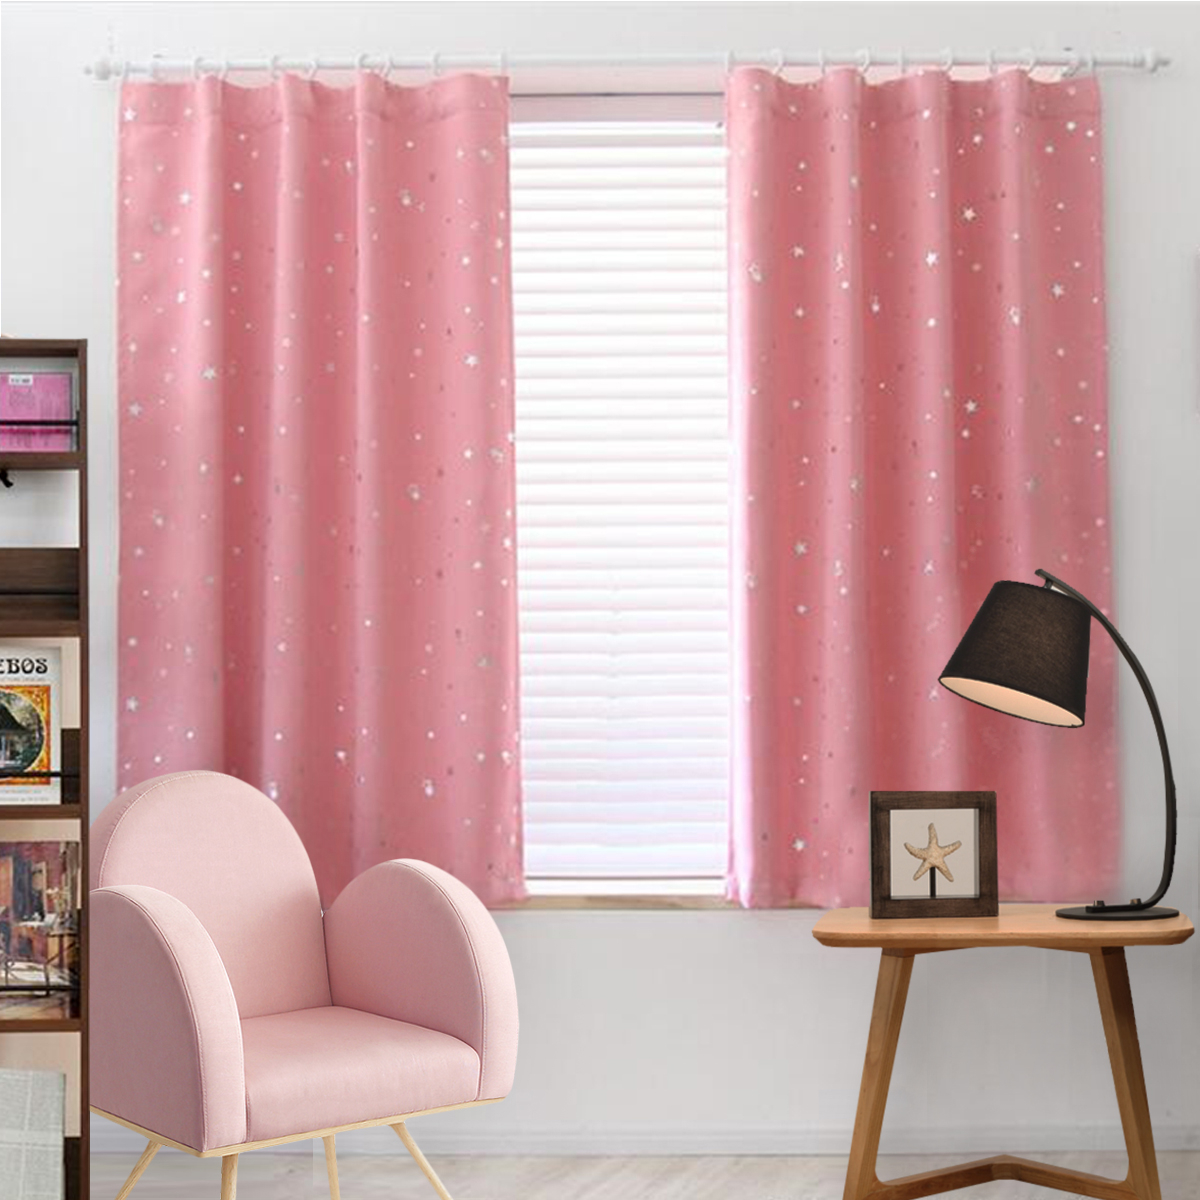 2 Panels Thermal Blackout Curtains Eyelet Ring Top Ready Made 3 Size 4 Colors US